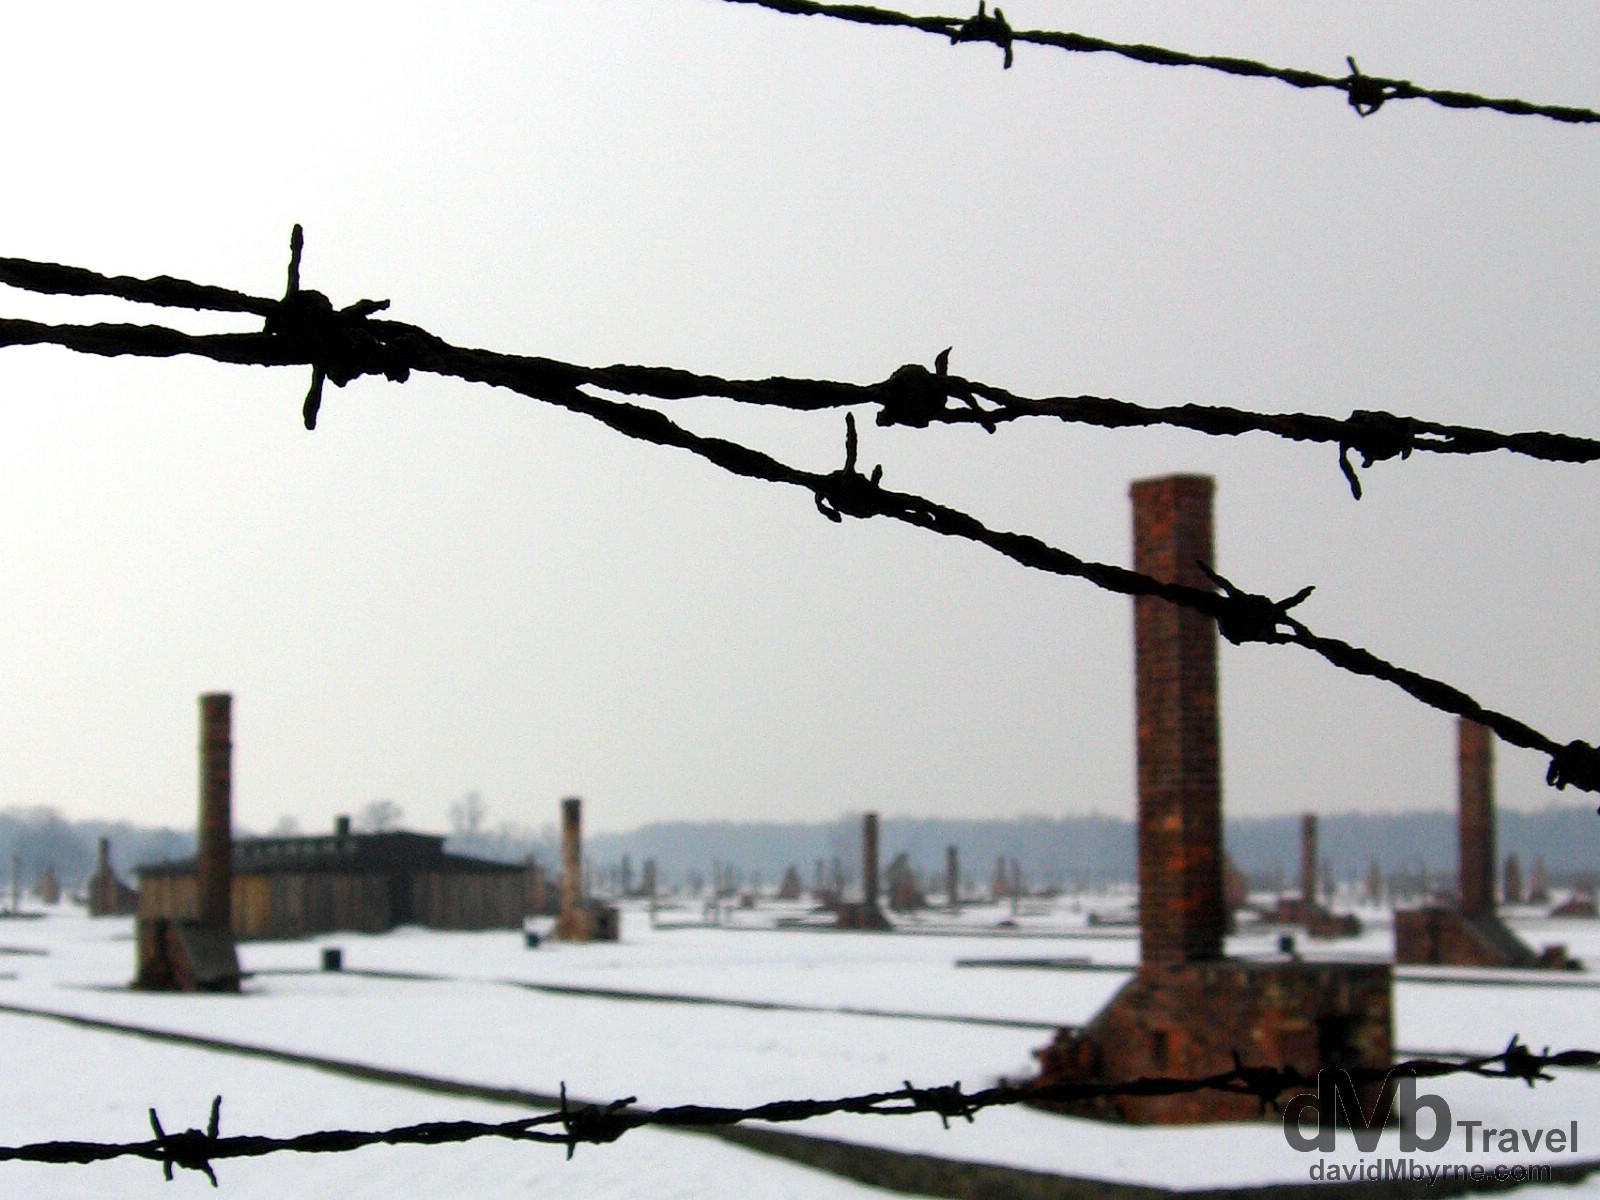 Remnants of the horrific past as seen through the fencing of the Birkenau Concentration Camp in Brzezinka, Poland. March 7, 2006,